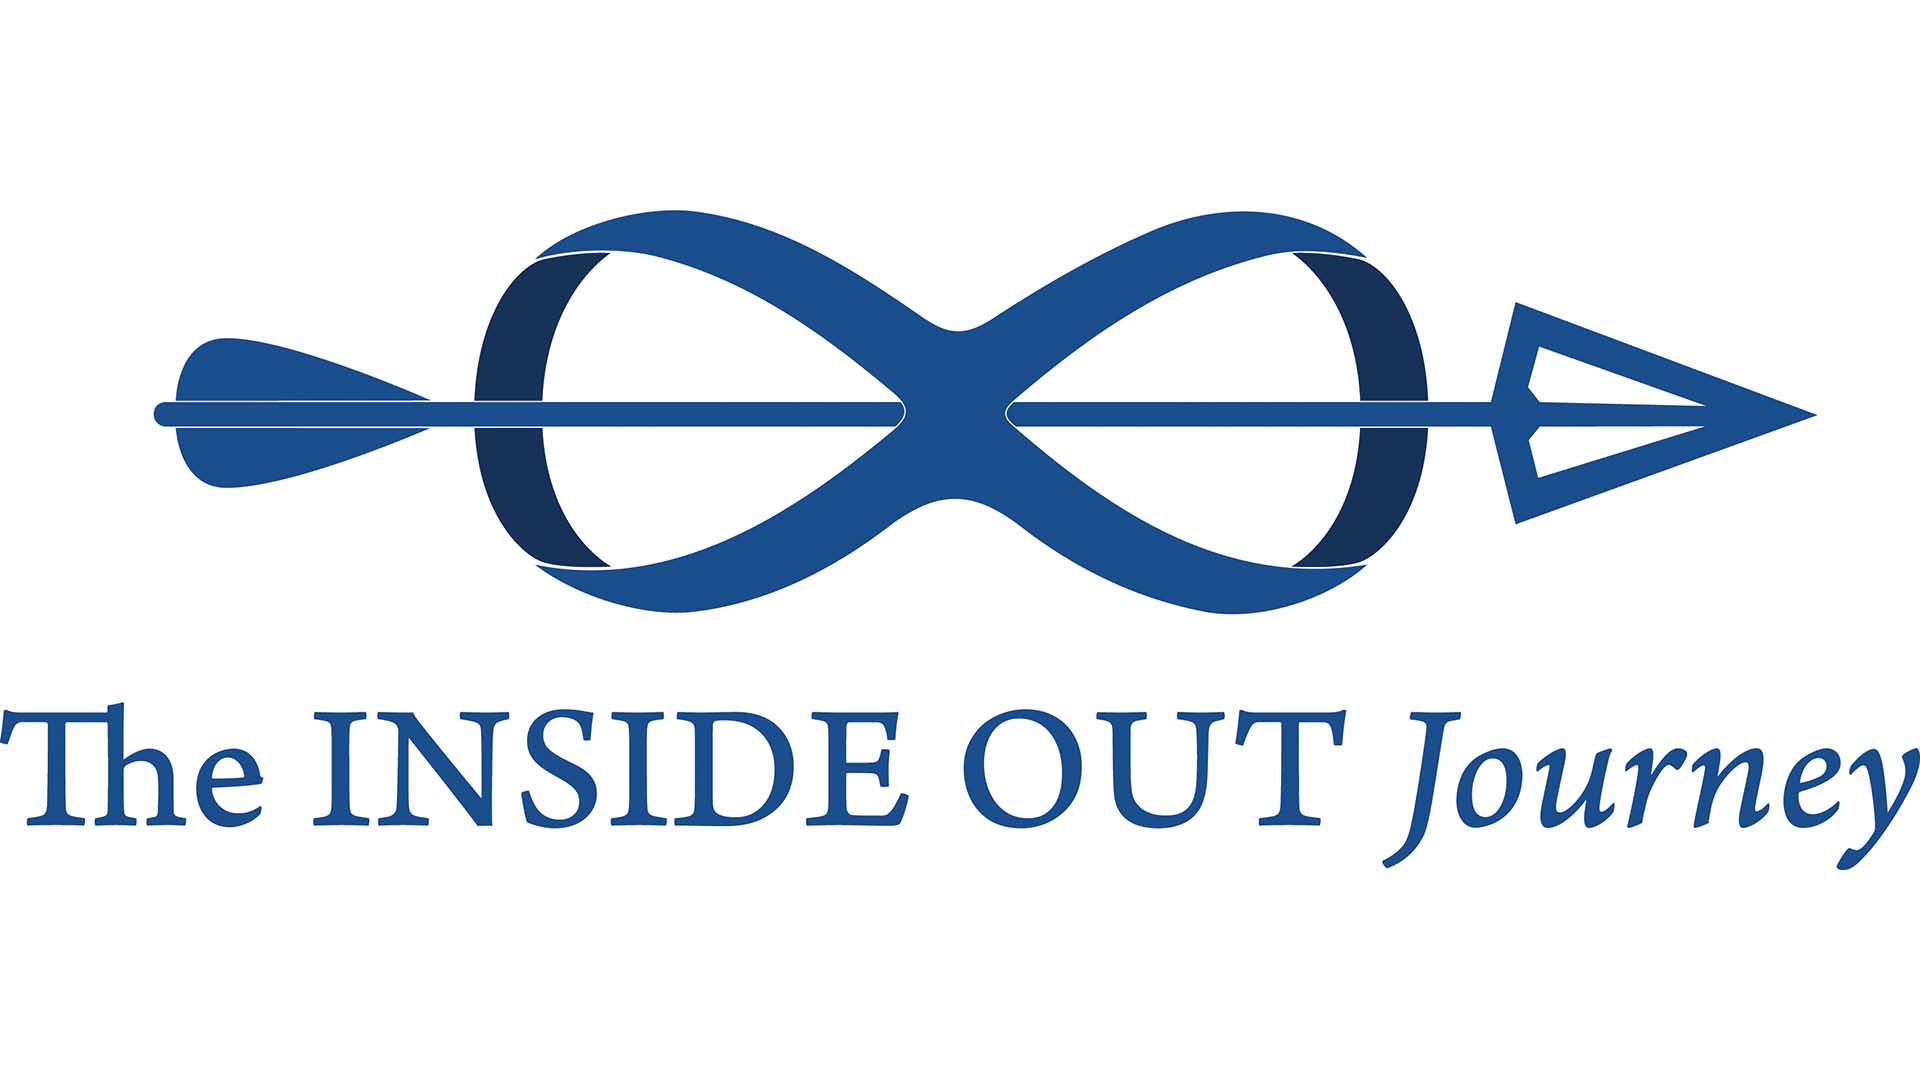 The Inside Out Journey logo